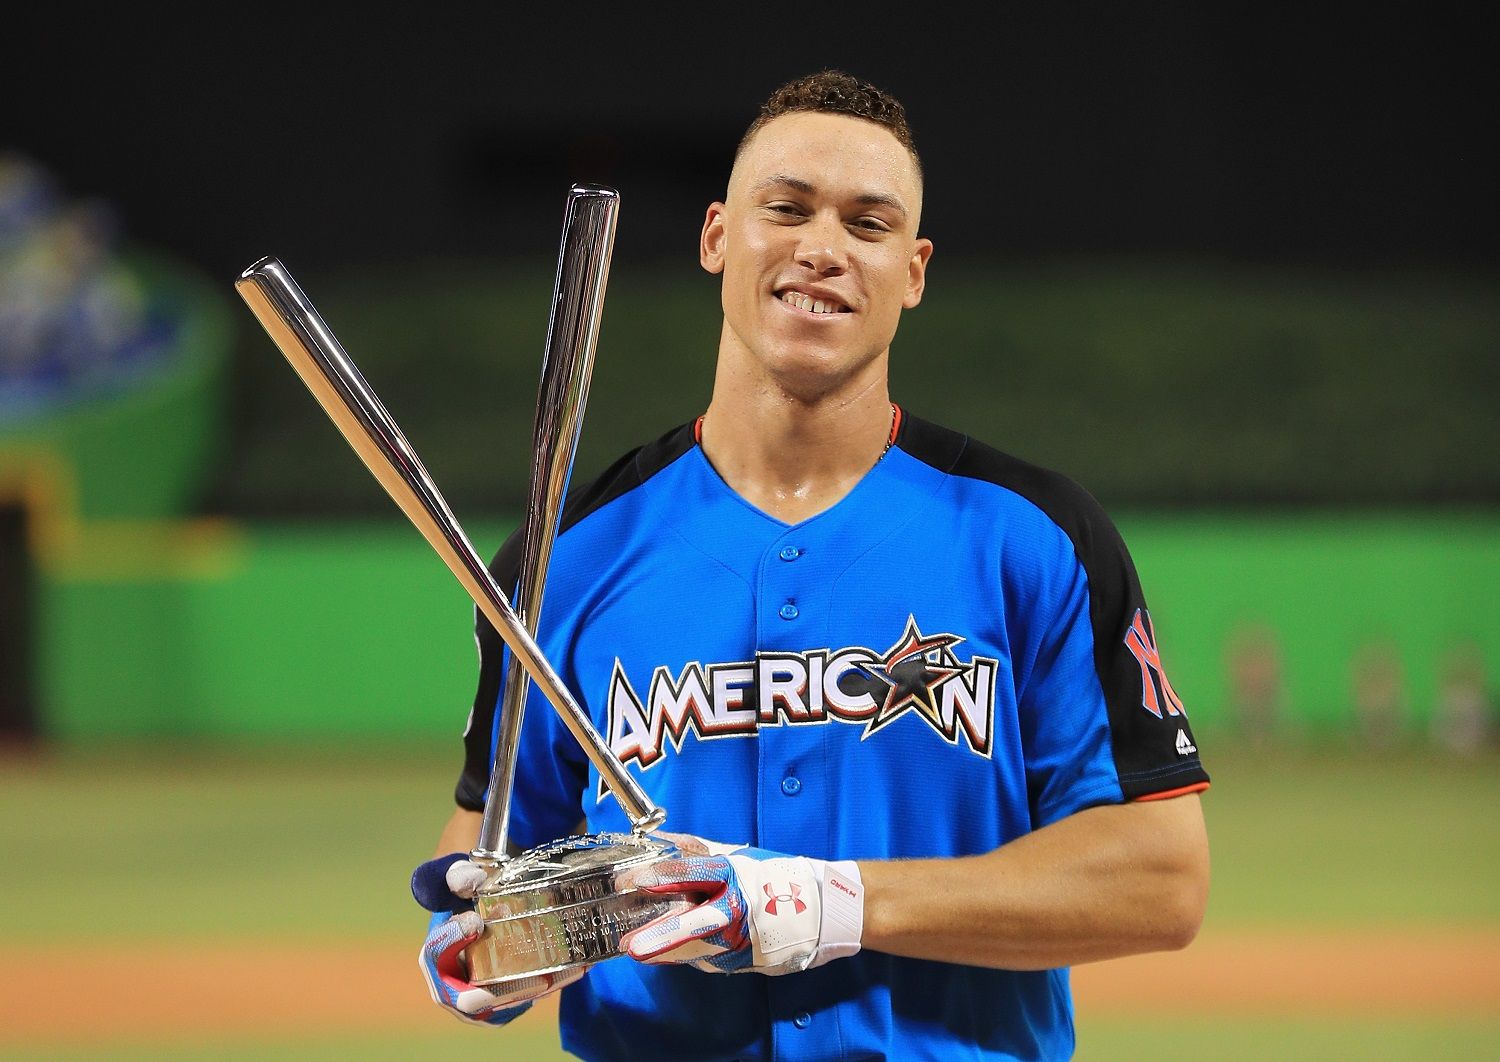 MIAMI, FL - JULY 10:  Aaron Judge #99 of the New York Yankees celebrates with the trophy after winning the T-Mobile Home Run Derby at Marlins Park on July 10, 2017 in Miami, Florida.  (Photo by Mike Ehrmann/Getty Images)